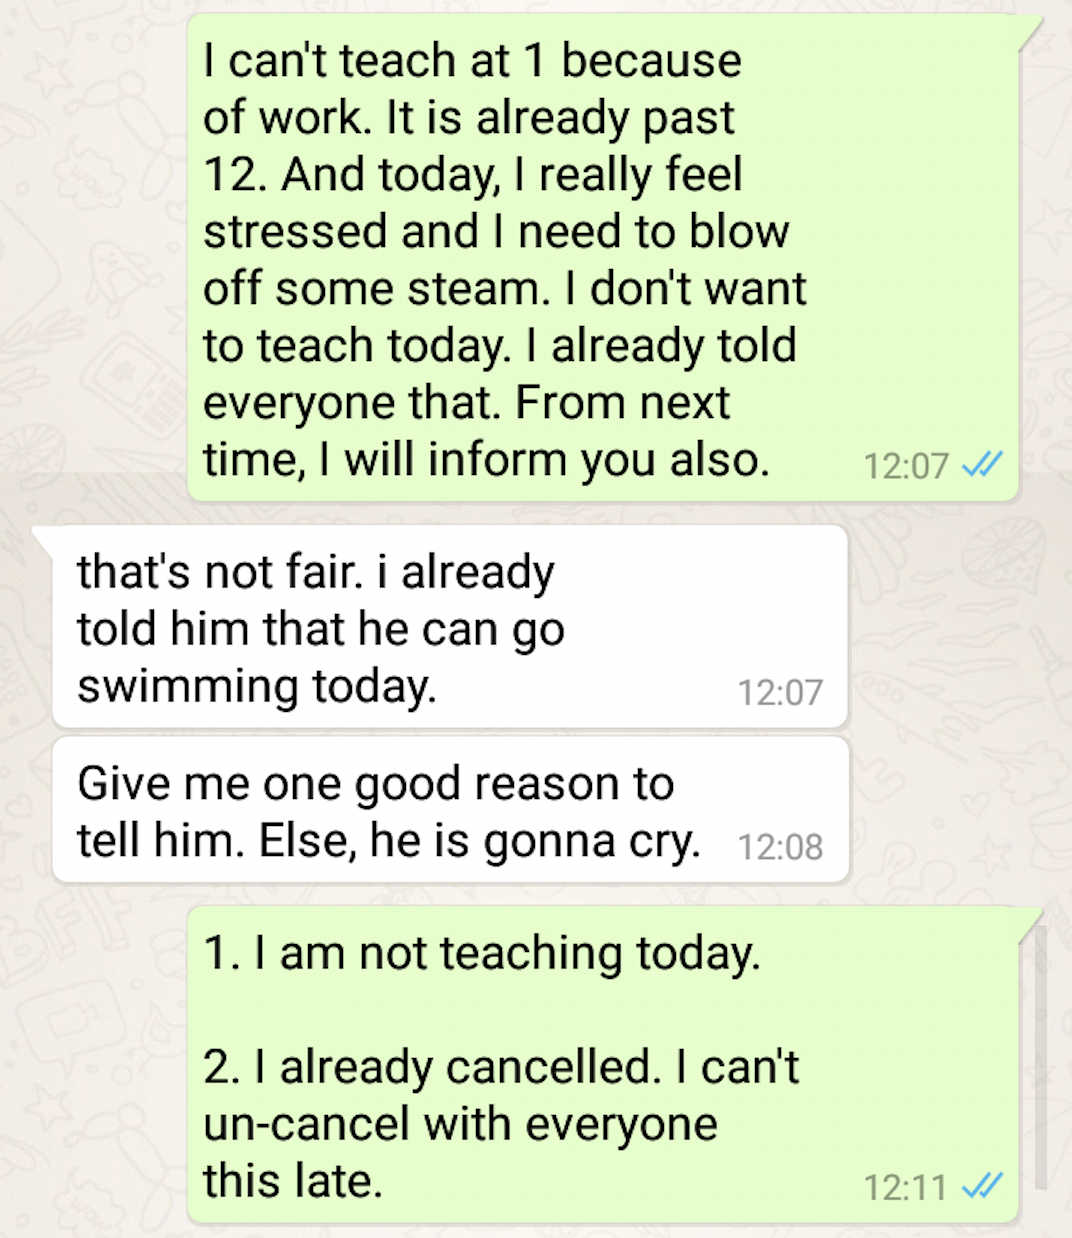 document - I can't teach at 1 because of work. It is already past 12. And today, I really feel stressed and I need to blow off some steam. I don't want to teach today. I already told everyone that. From next time, I will inform you also. that's not fair. 